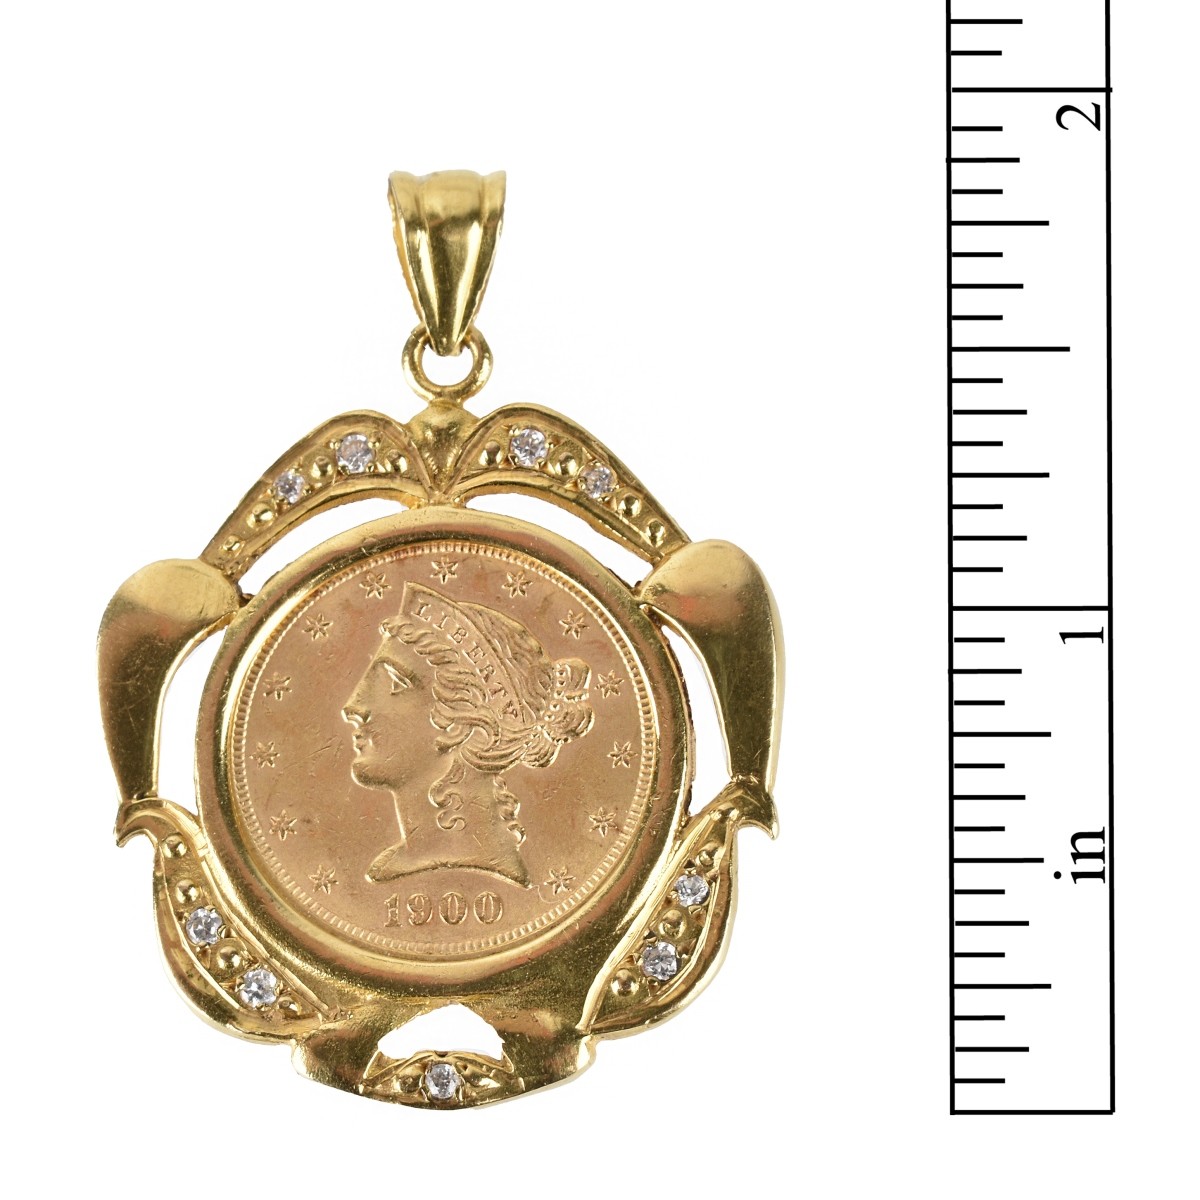 US 1900 $5 Gold Coin Pendant